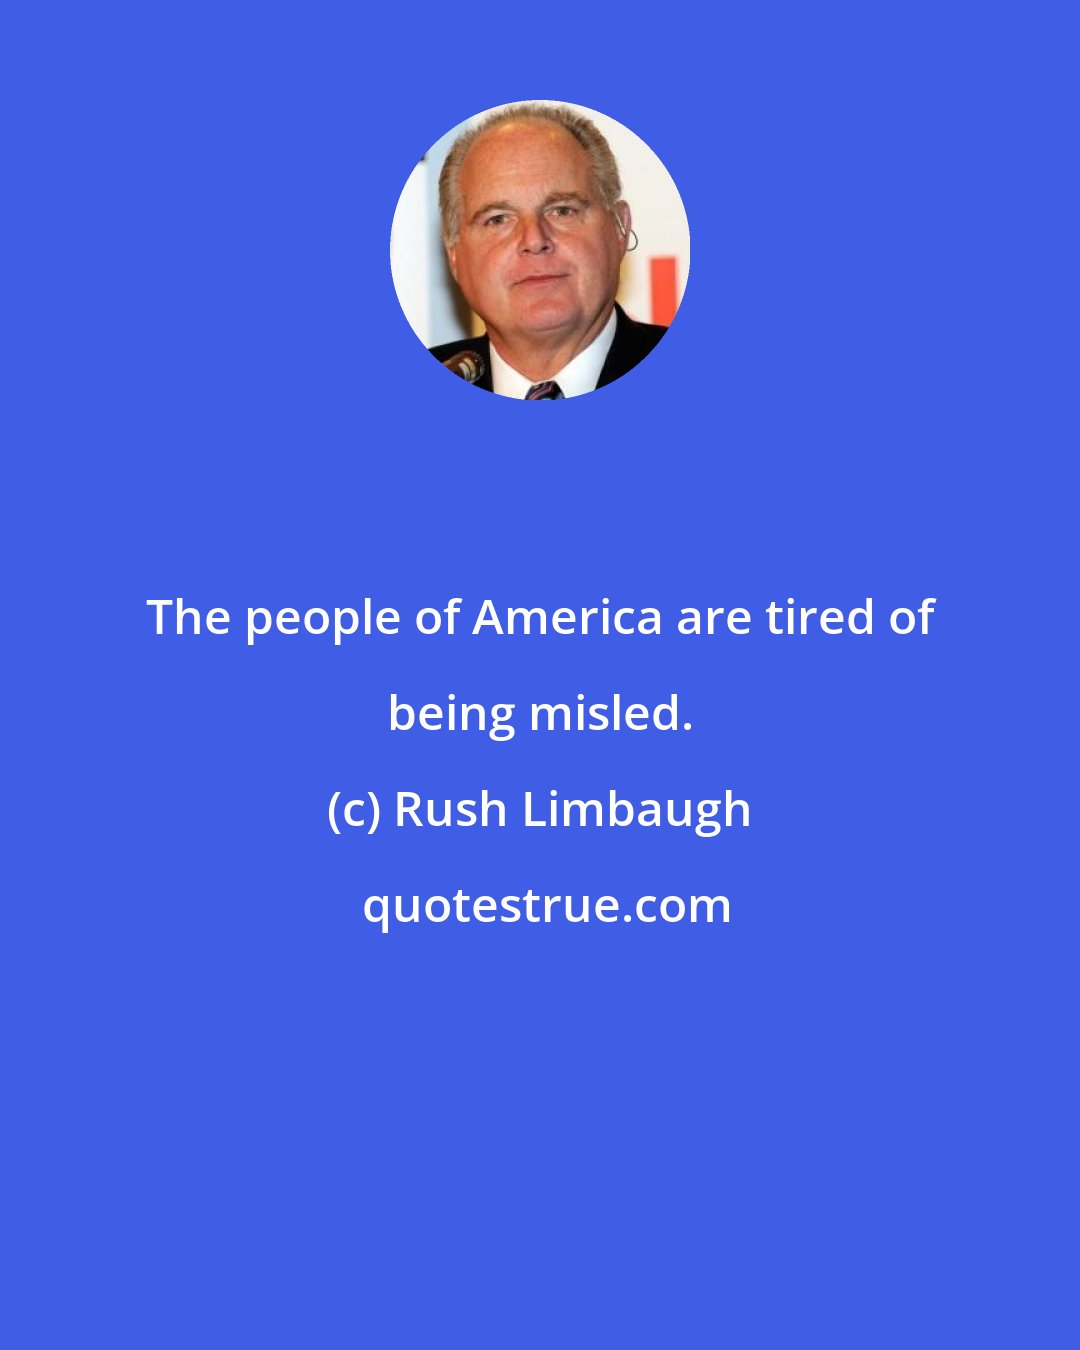 Rush Limbaugh: The people of America are tired of being misled.